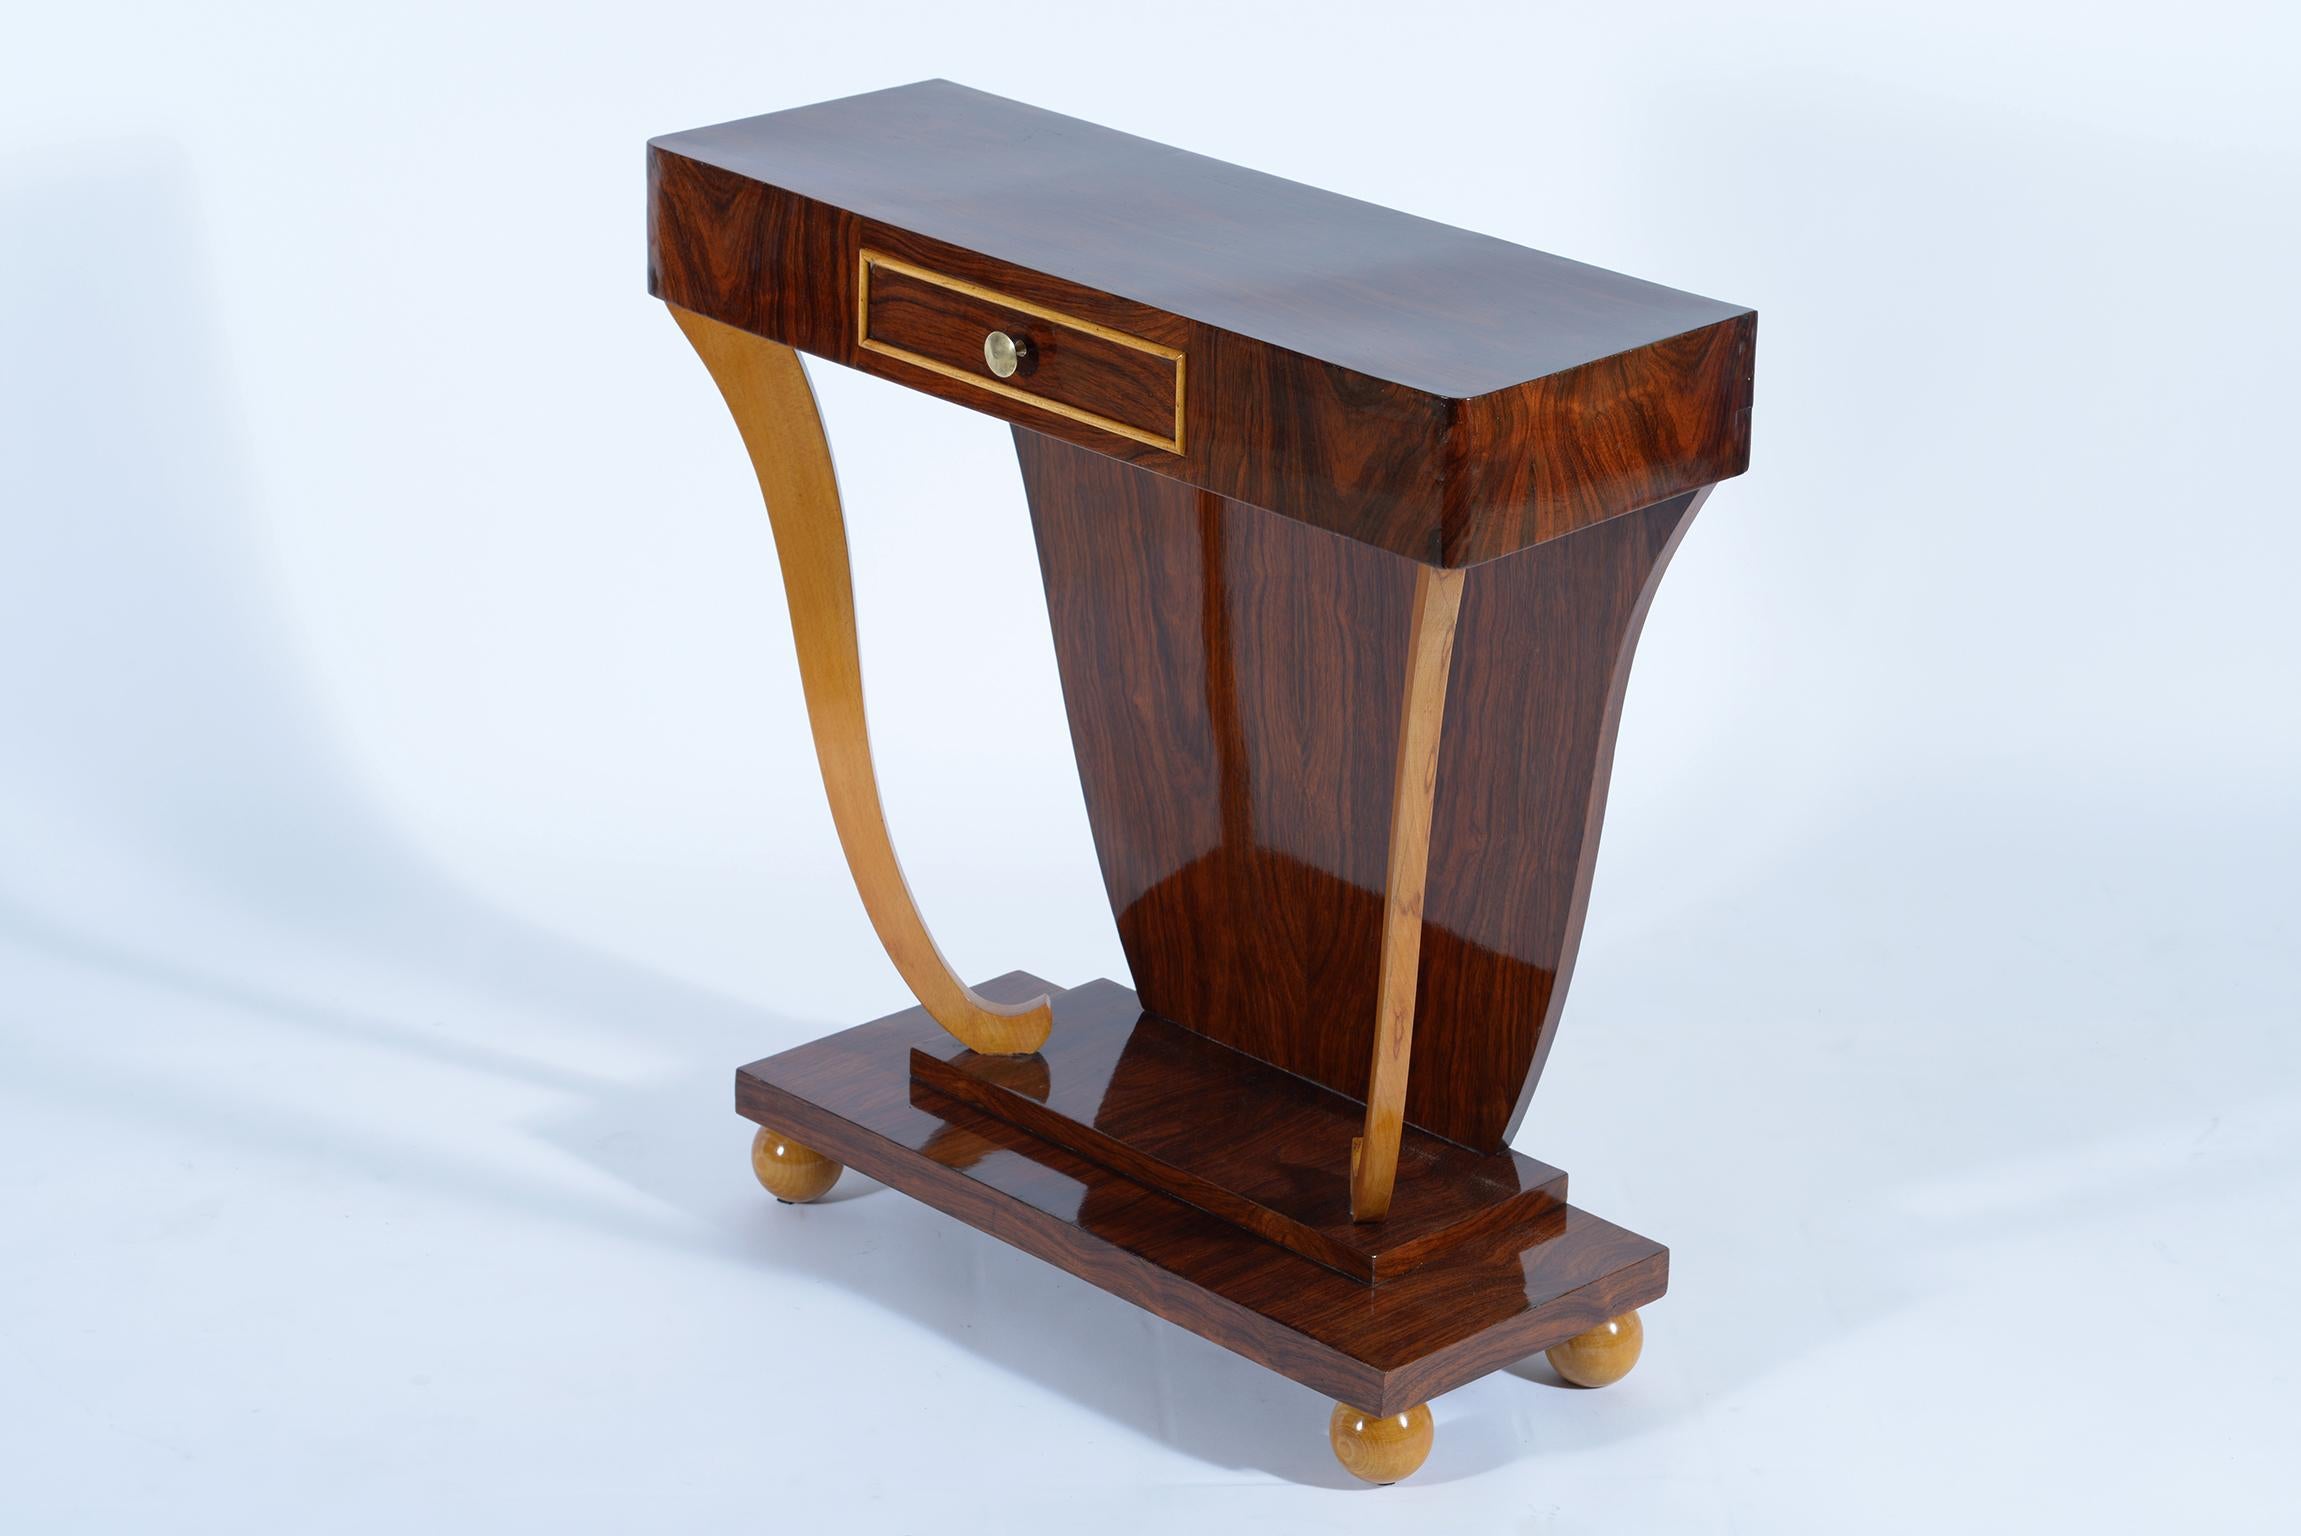 Italian 1930s console in walnut and maples teh with drawer is supported by two curly solid maple legs.
Brass handle.
Four wood spheres complete the base.
Art Deco.